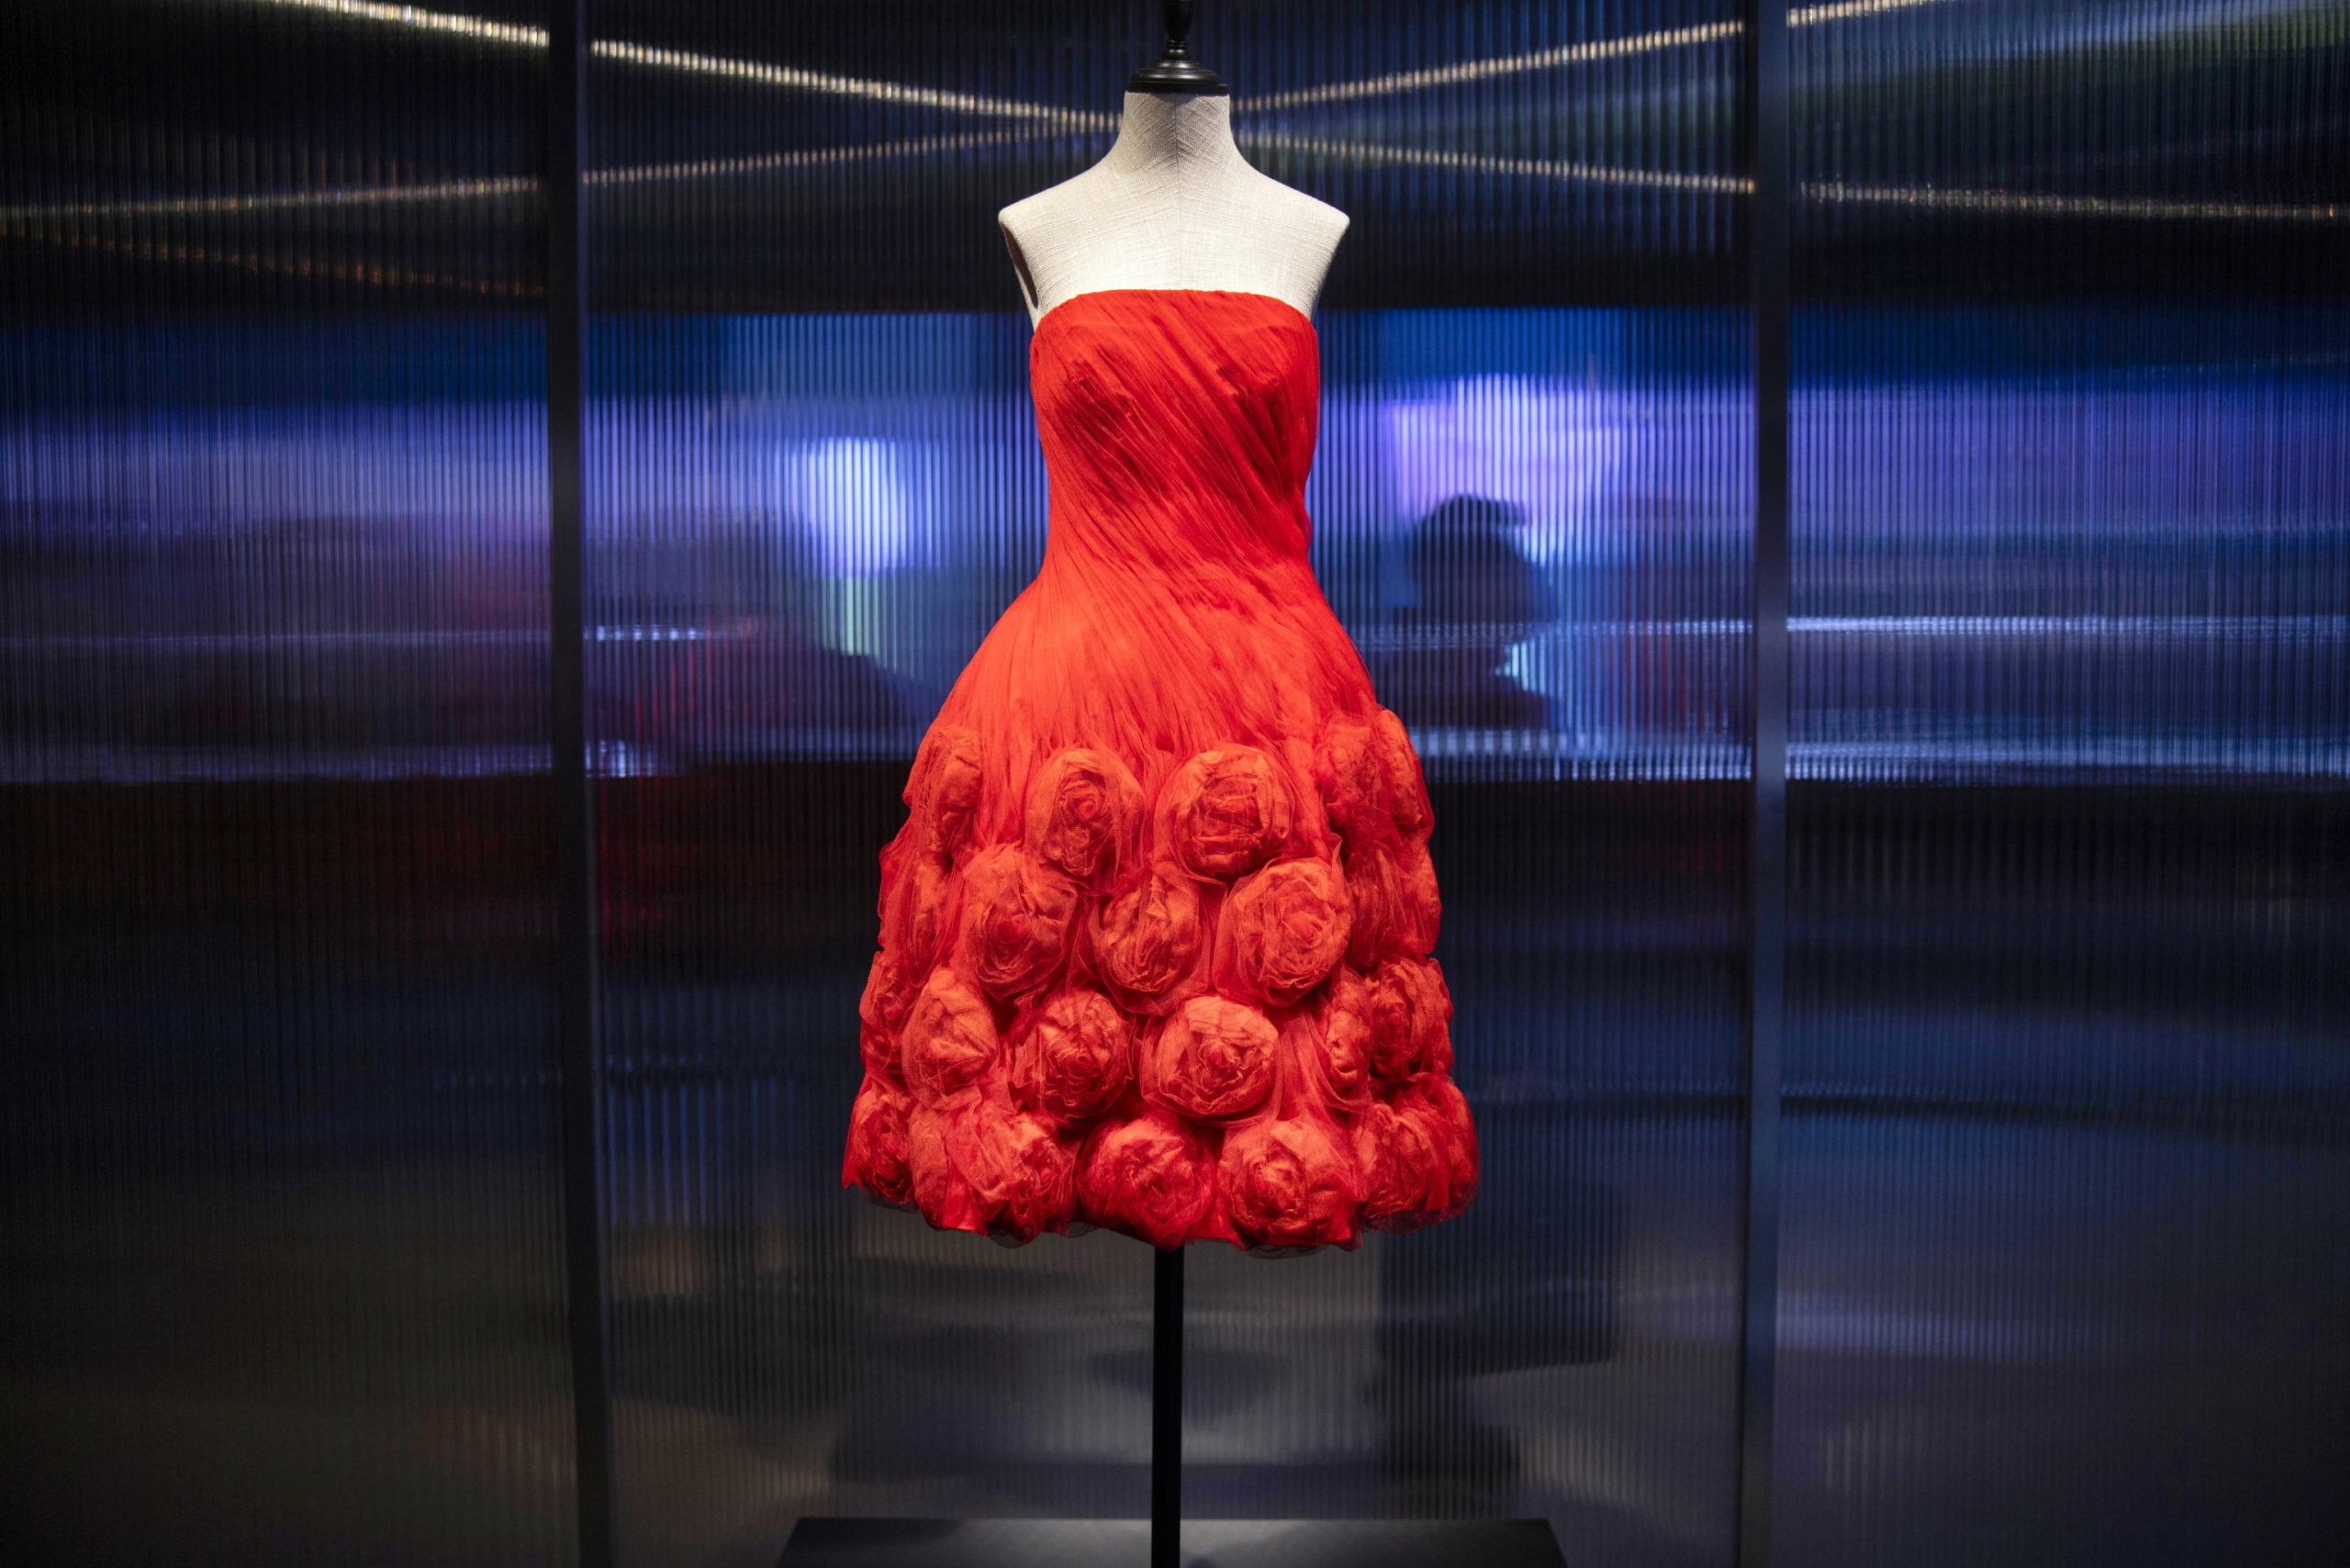 epa08920194 A dress is on display as visitors stand behind a transparent screen at an art exhibition of the Italian fashion brand Valentino in Shanghai, China, 05 January 2021. The exhibit titled 'Re-Signify Part One Shanghai' features creations from current collections of Maison Valentino and its archives and runs at Shanghai's Power Station of Art  Museum until 17 January.  EPA/ALEX PLAVEVSKI